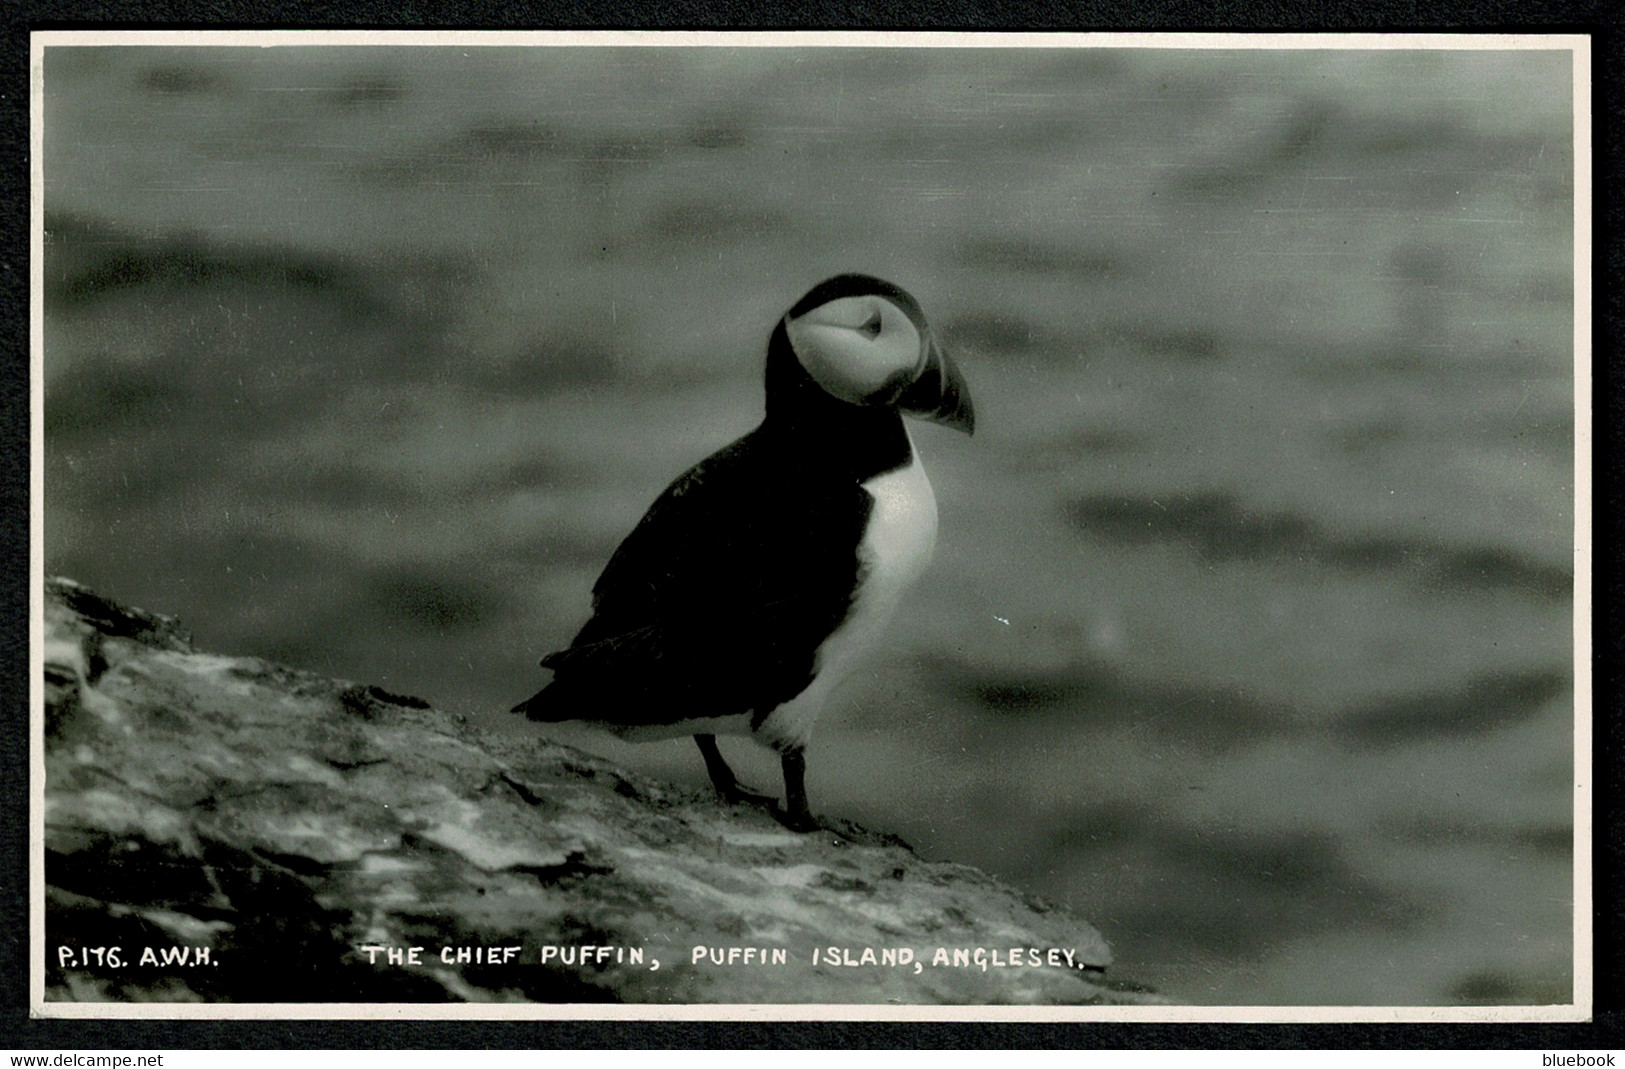 Ref 1579 - Real Photo Postcard - The Chief Puffin - Puffin Island Anglesey Wales - Bird Theme - Anglesey